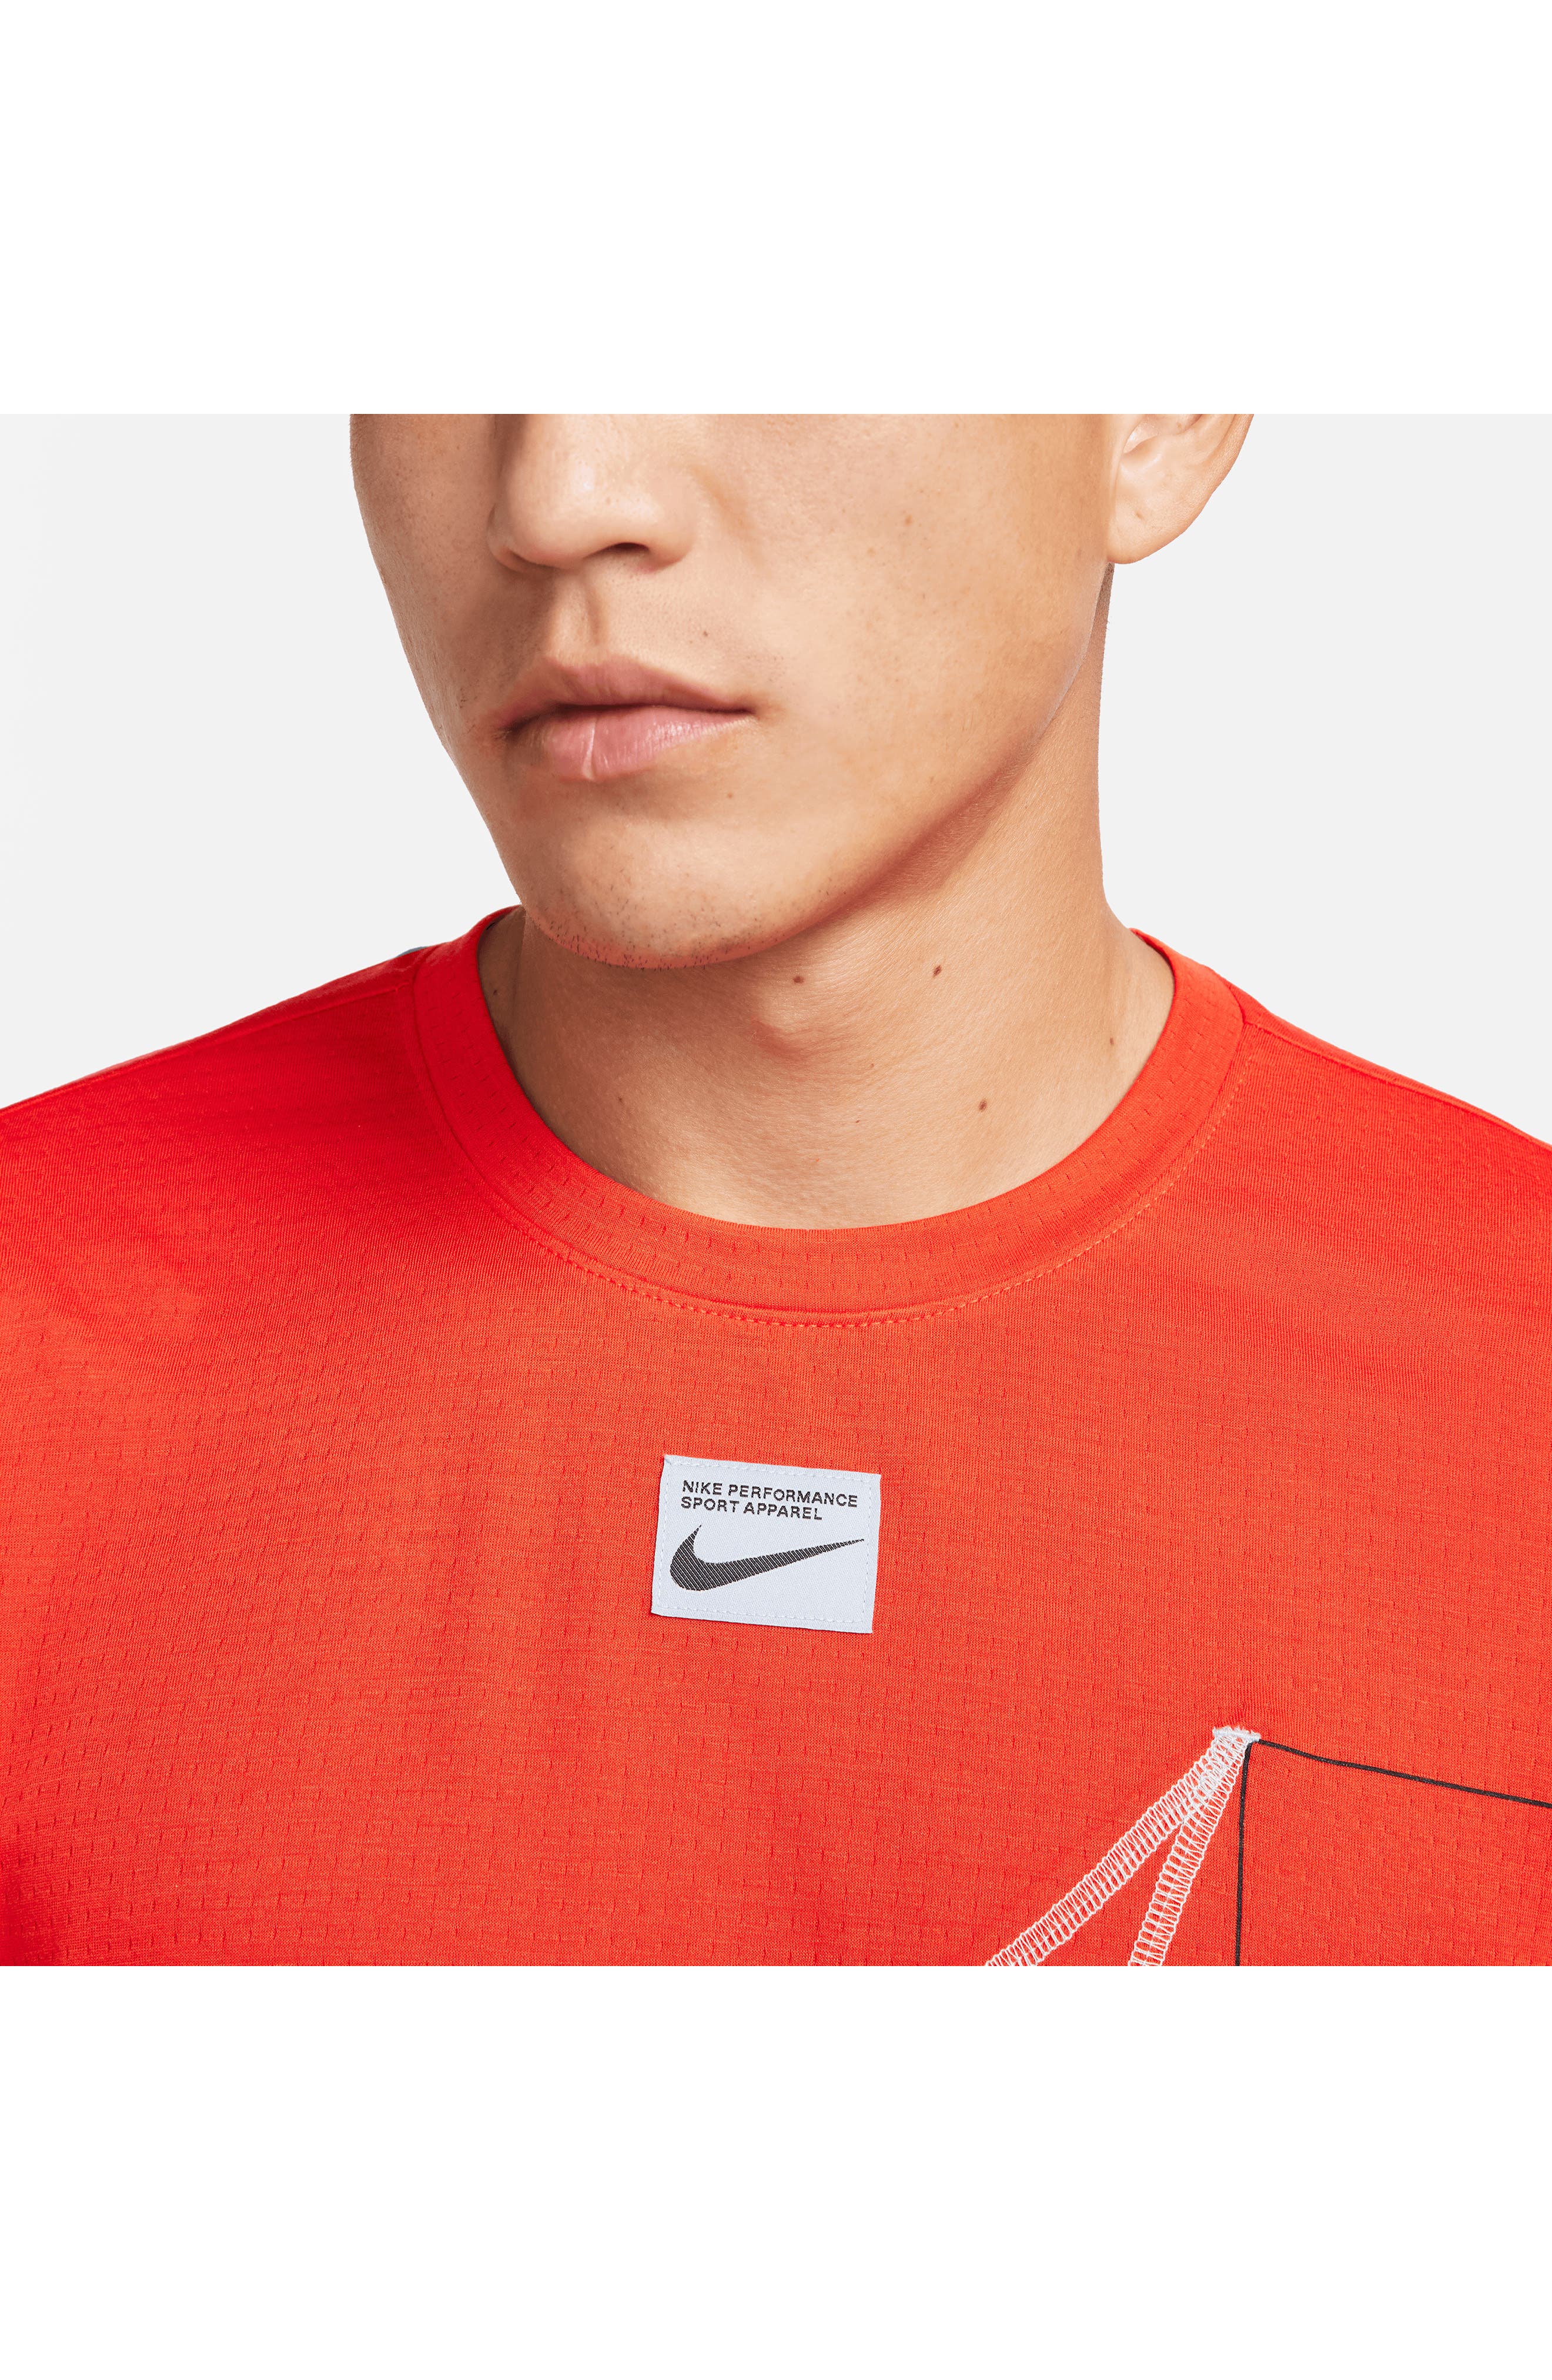 Nike Dri-FIT in T-Shirt | Closet Whisper Q5 Fitness Red/Blue Smart Picante